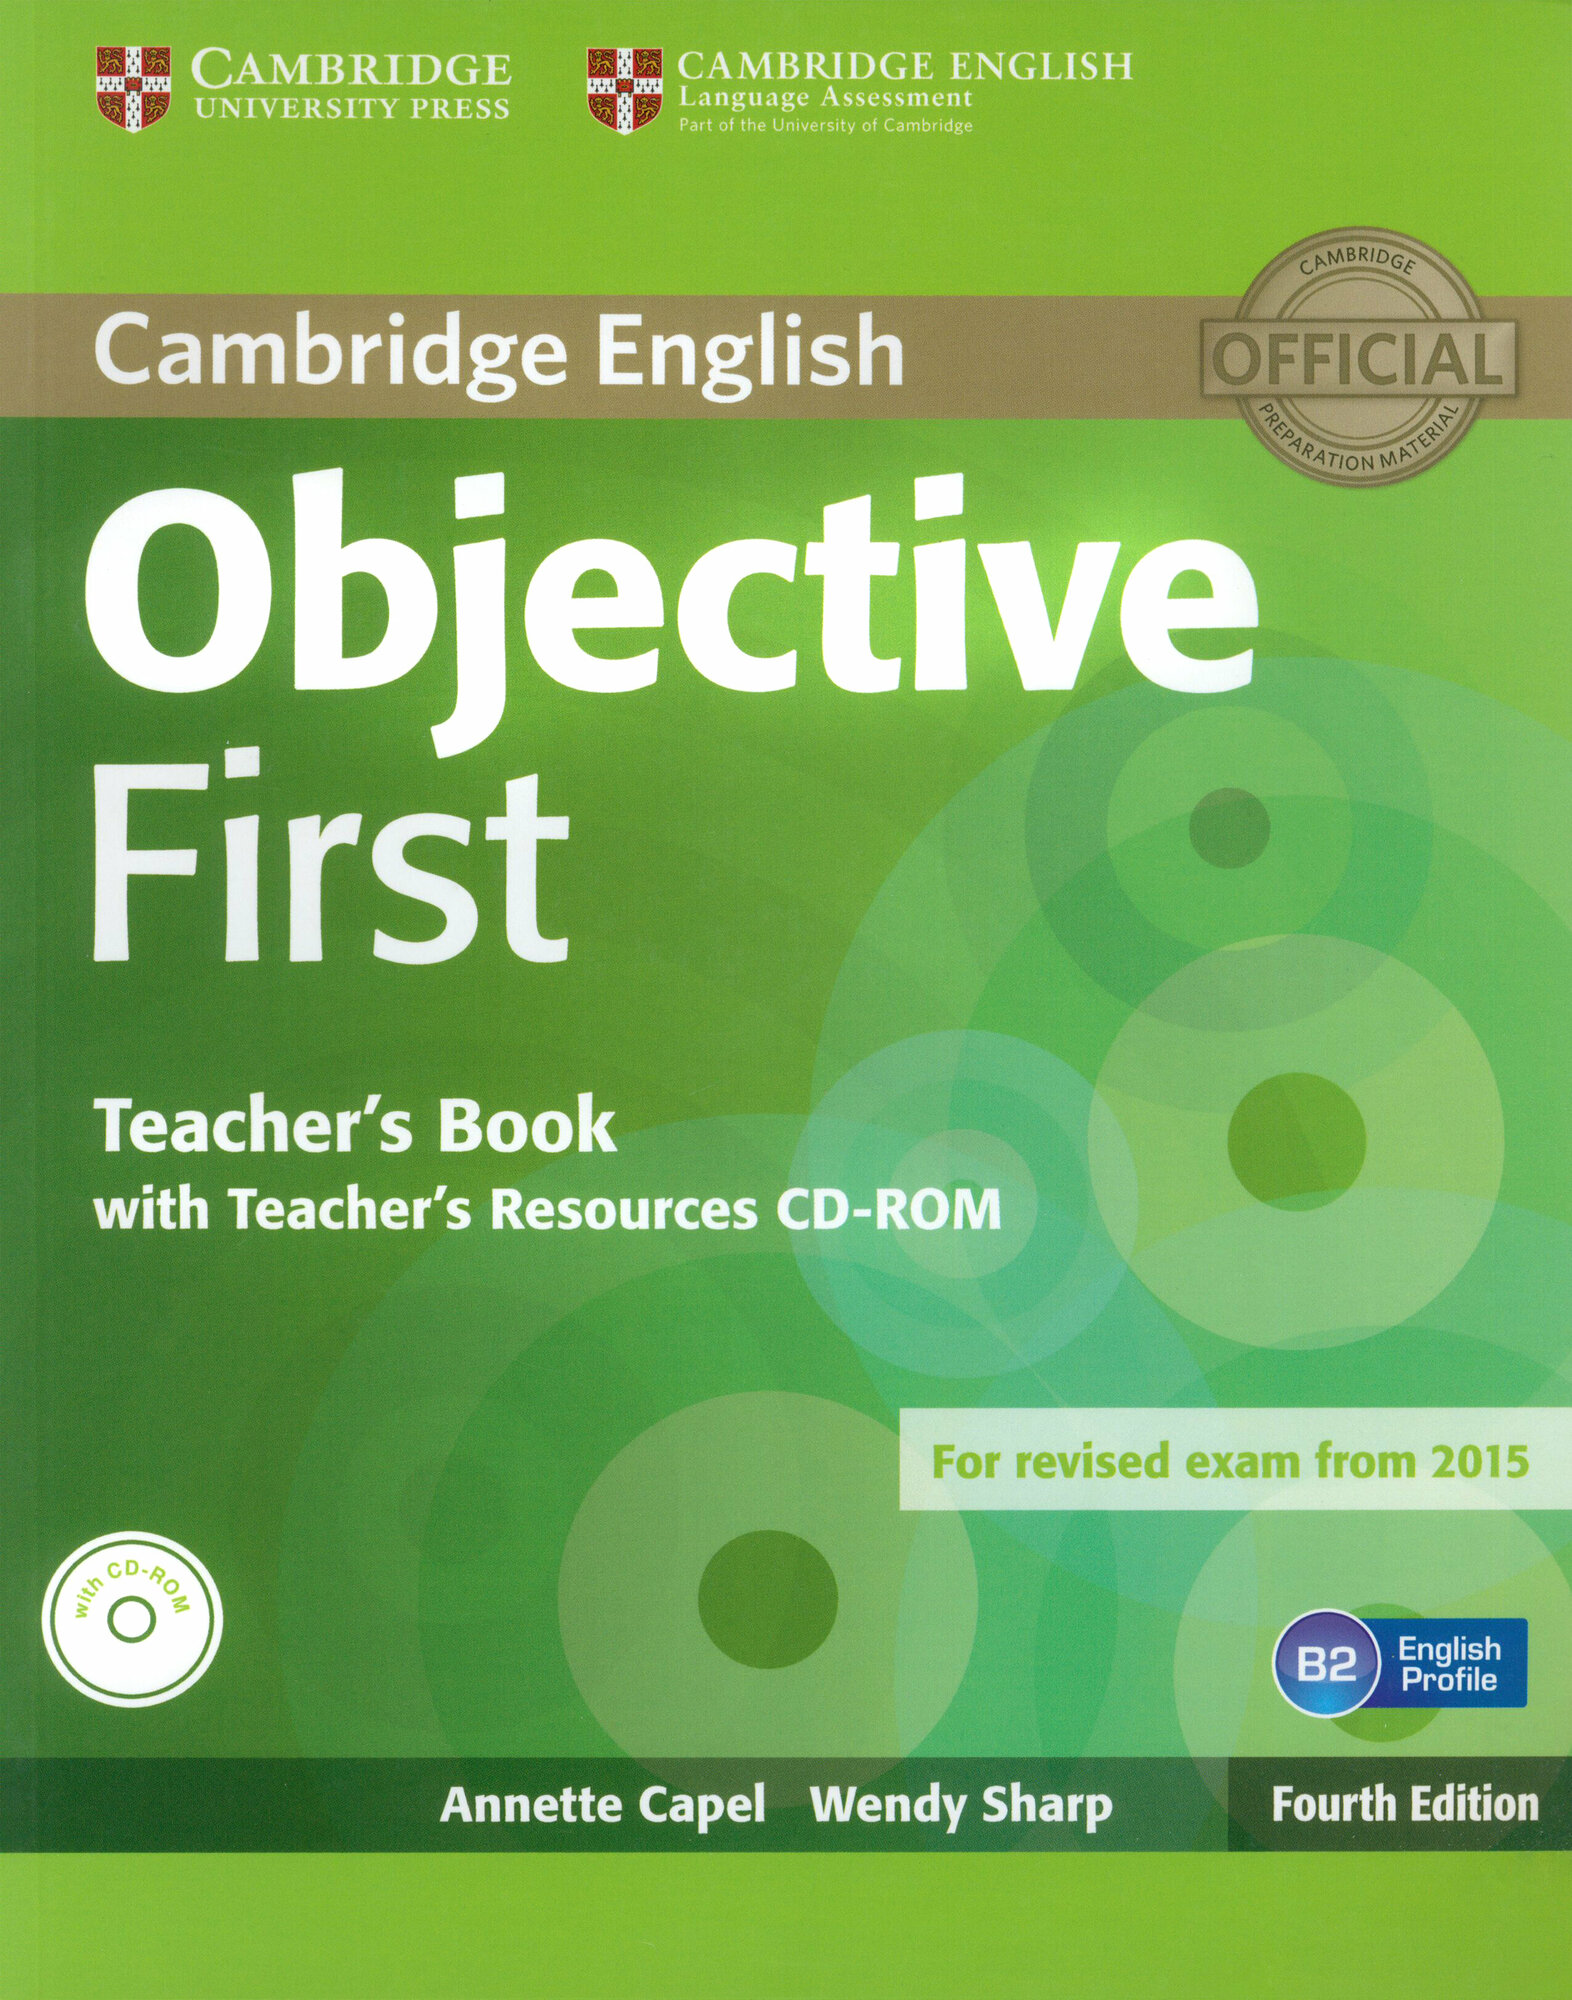 Objective. 4th Edition. First. Teacher's Book with Teacher's Resources CD / Мультимедиа / Capel Annette